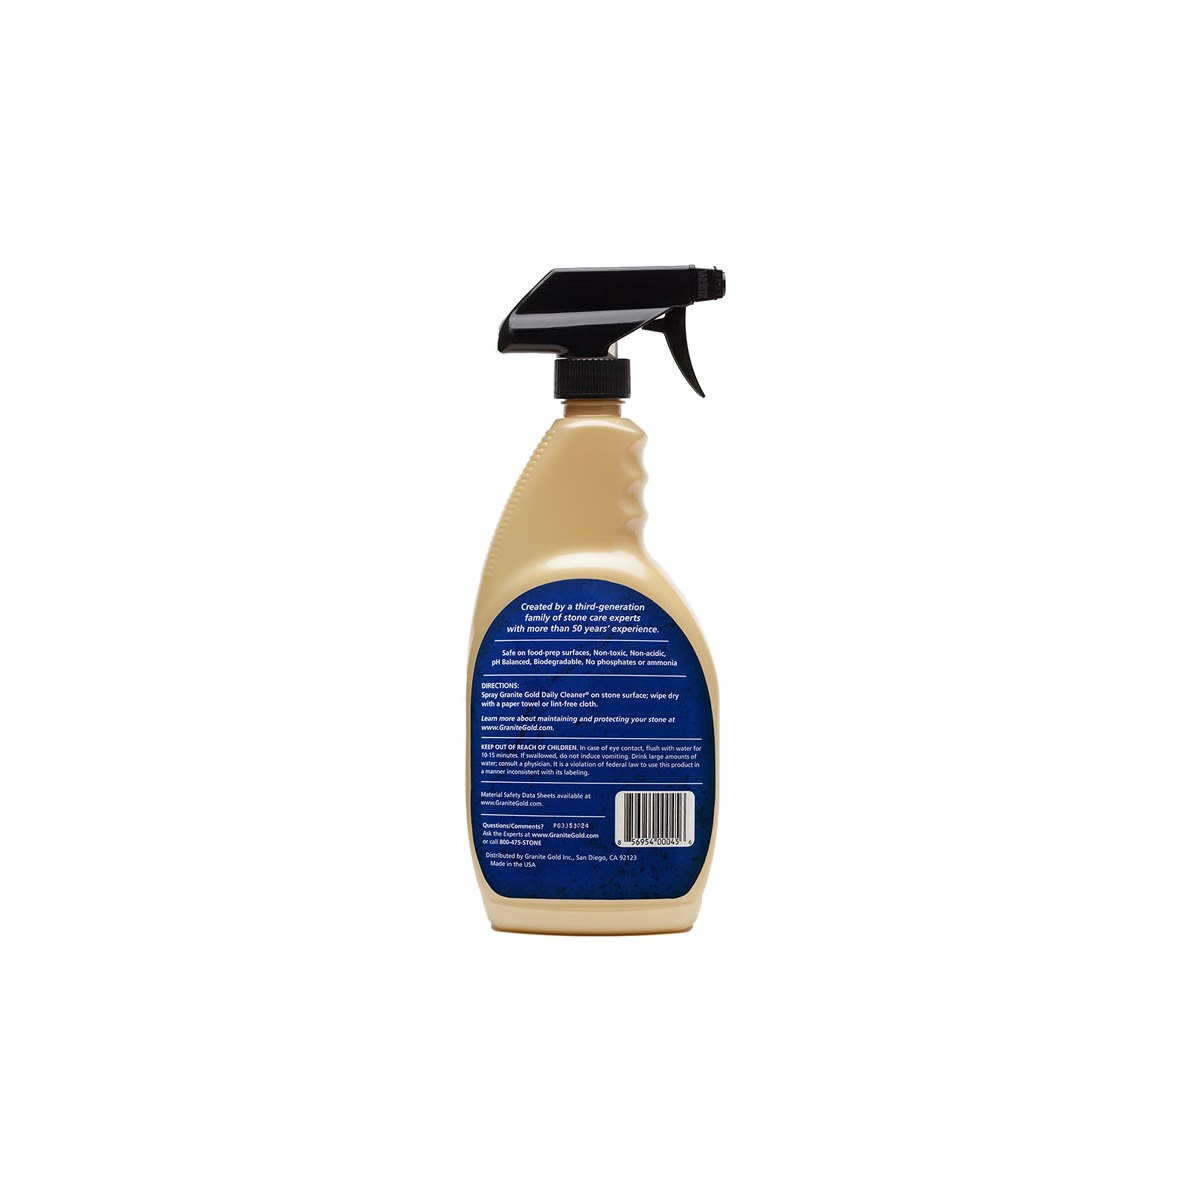 How to use Granite Gold Cleaner Spray